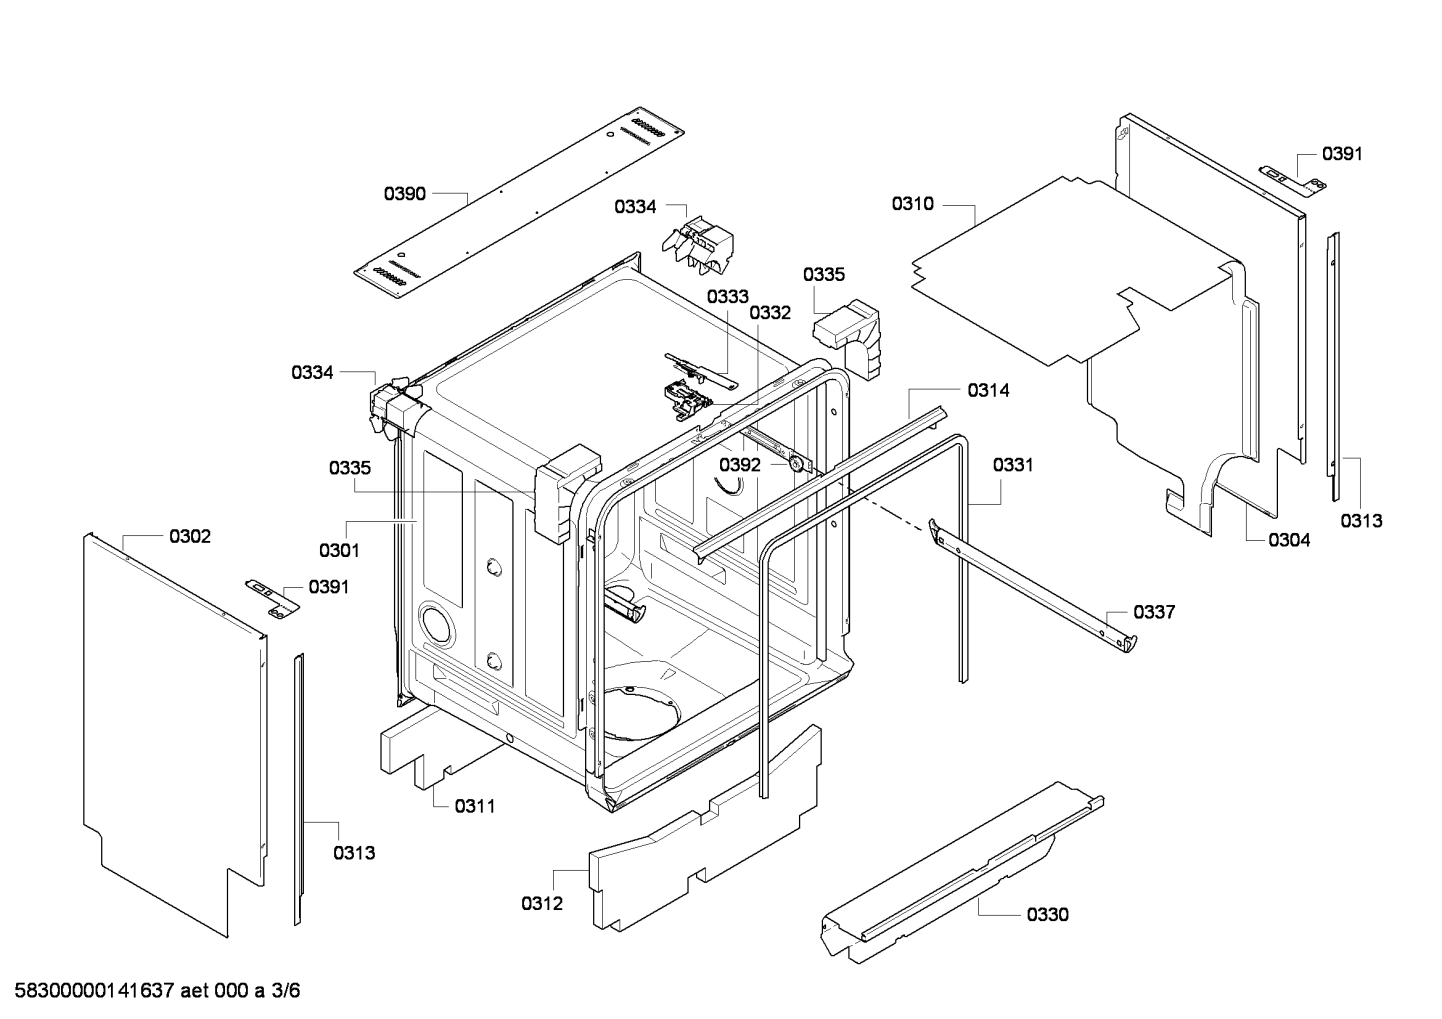 drawing_link_3_device_1565850